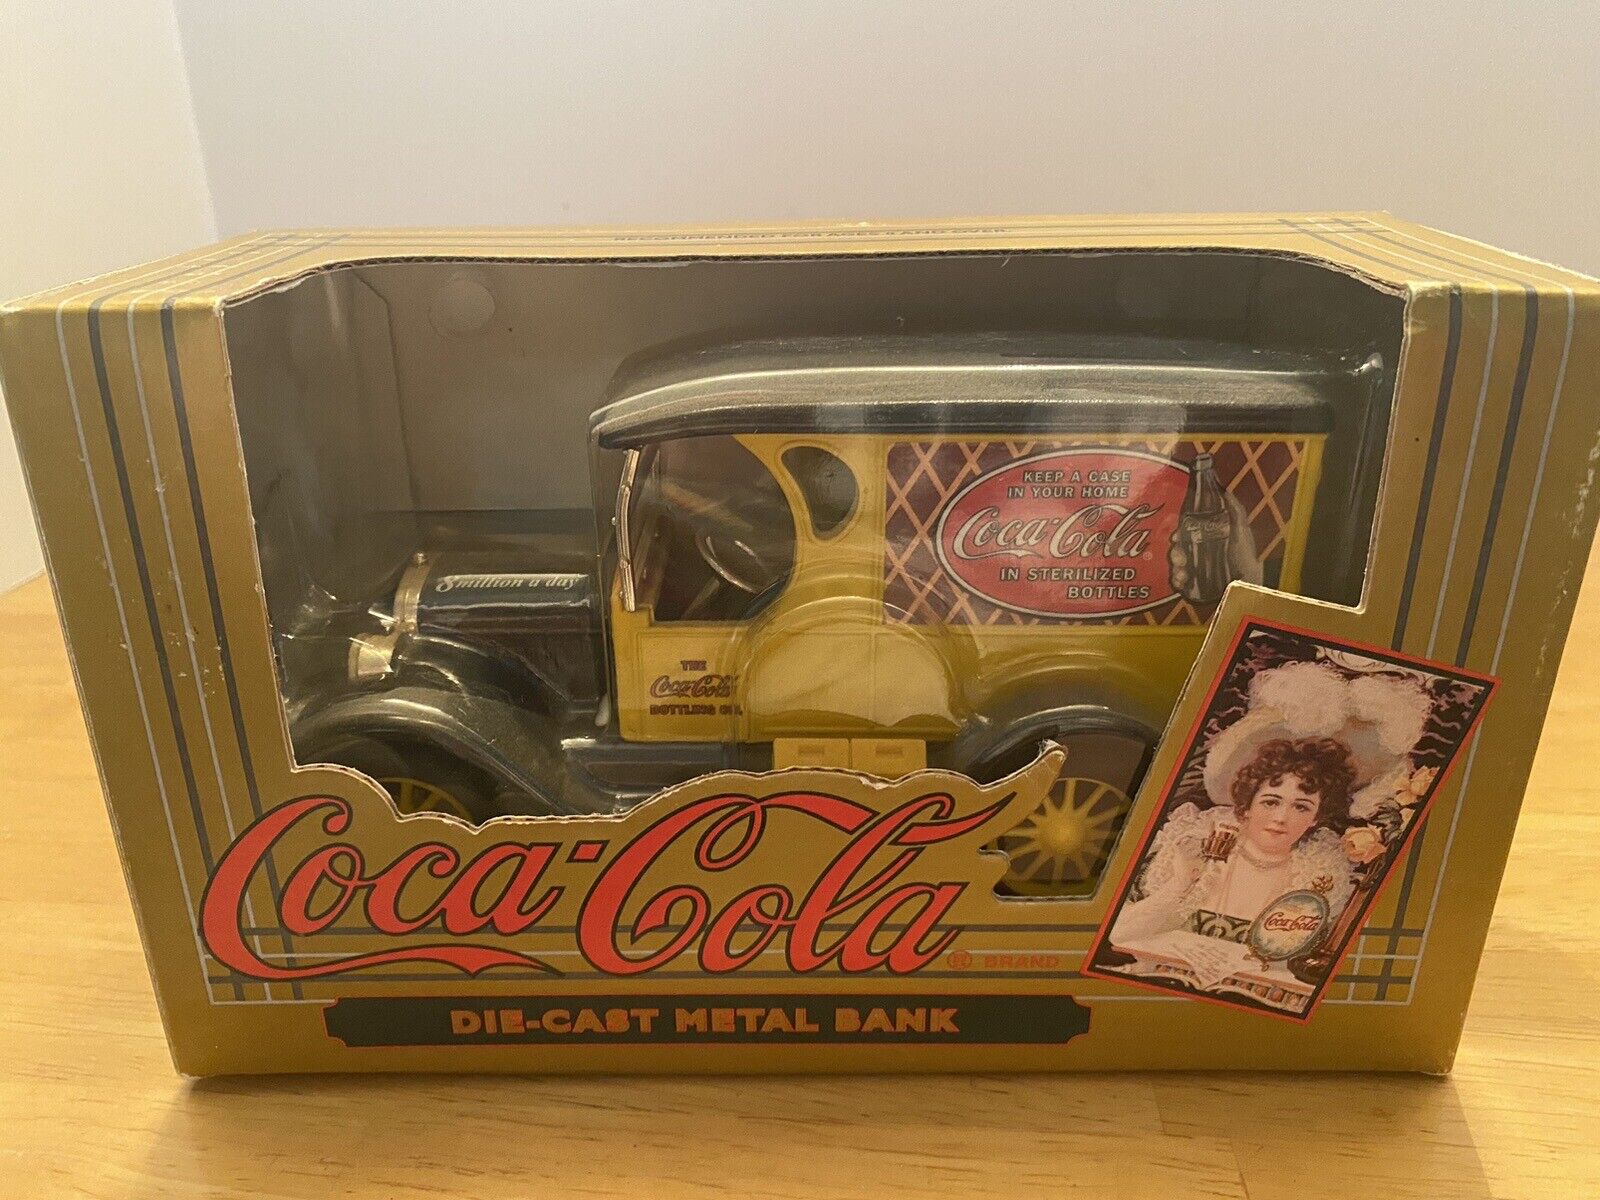 Ertl Coca Cola Die Cast Bank, Chevy Delivery Truck 1:25 Scale, 